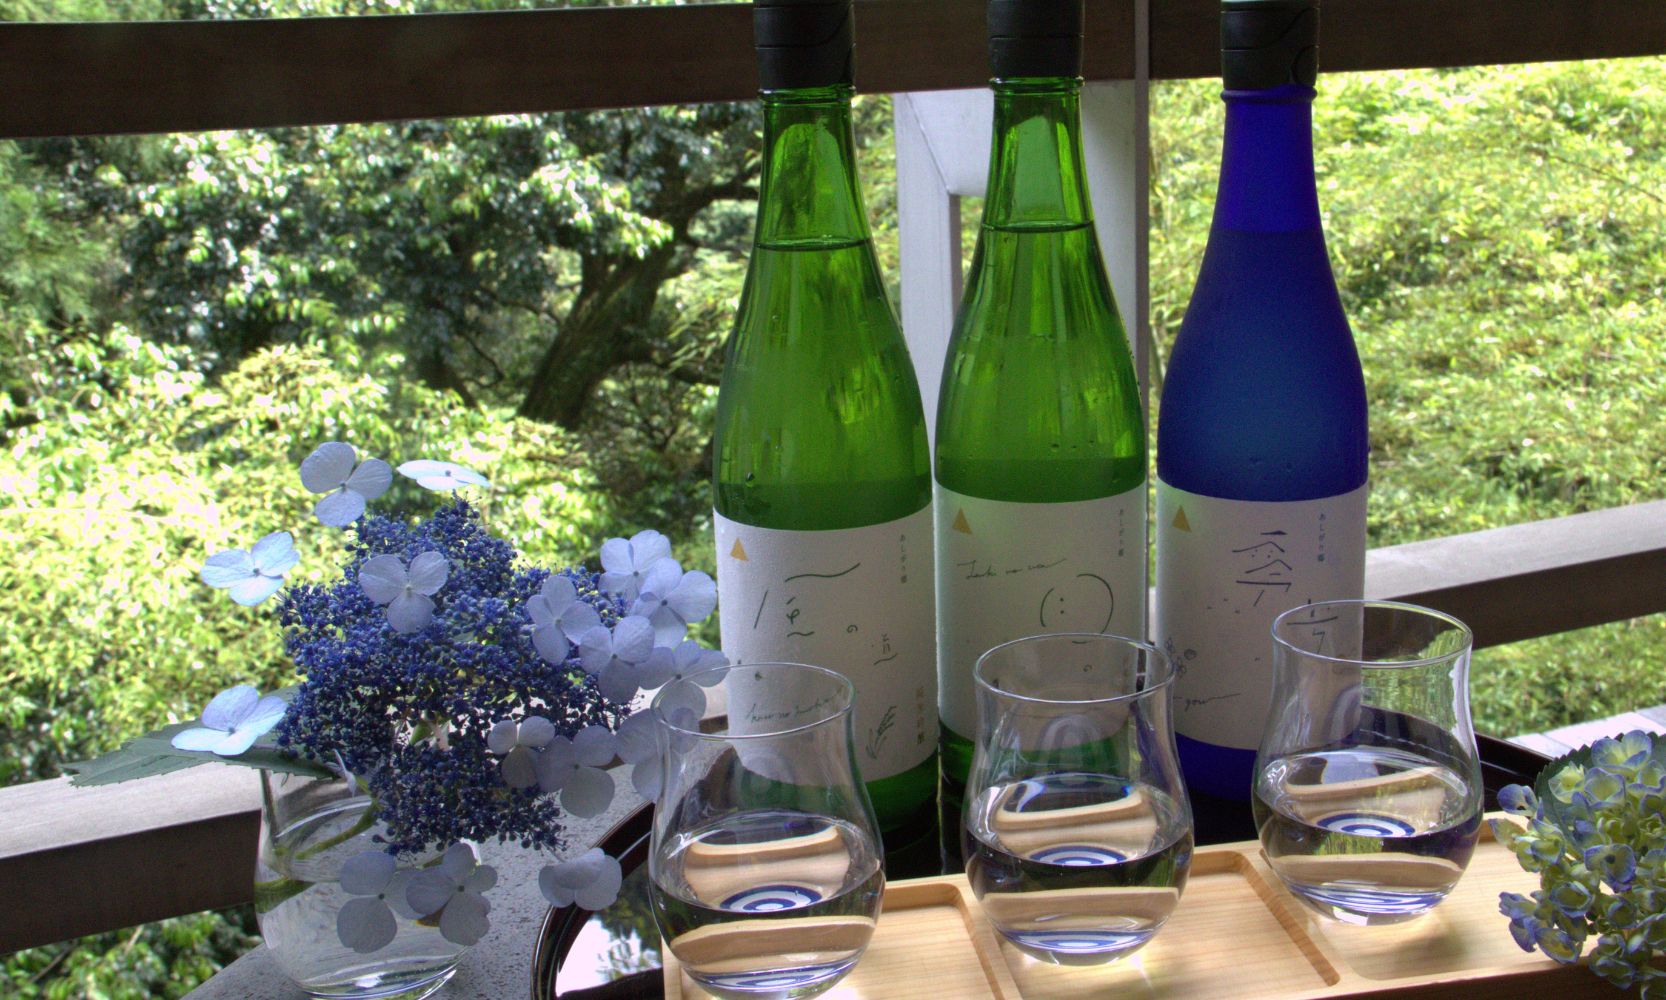 avor a Tasting Set to Enjoy the Rainy Season in Hakone, a Famous Hydrangea Spot, Available from June 2nd (Friday)